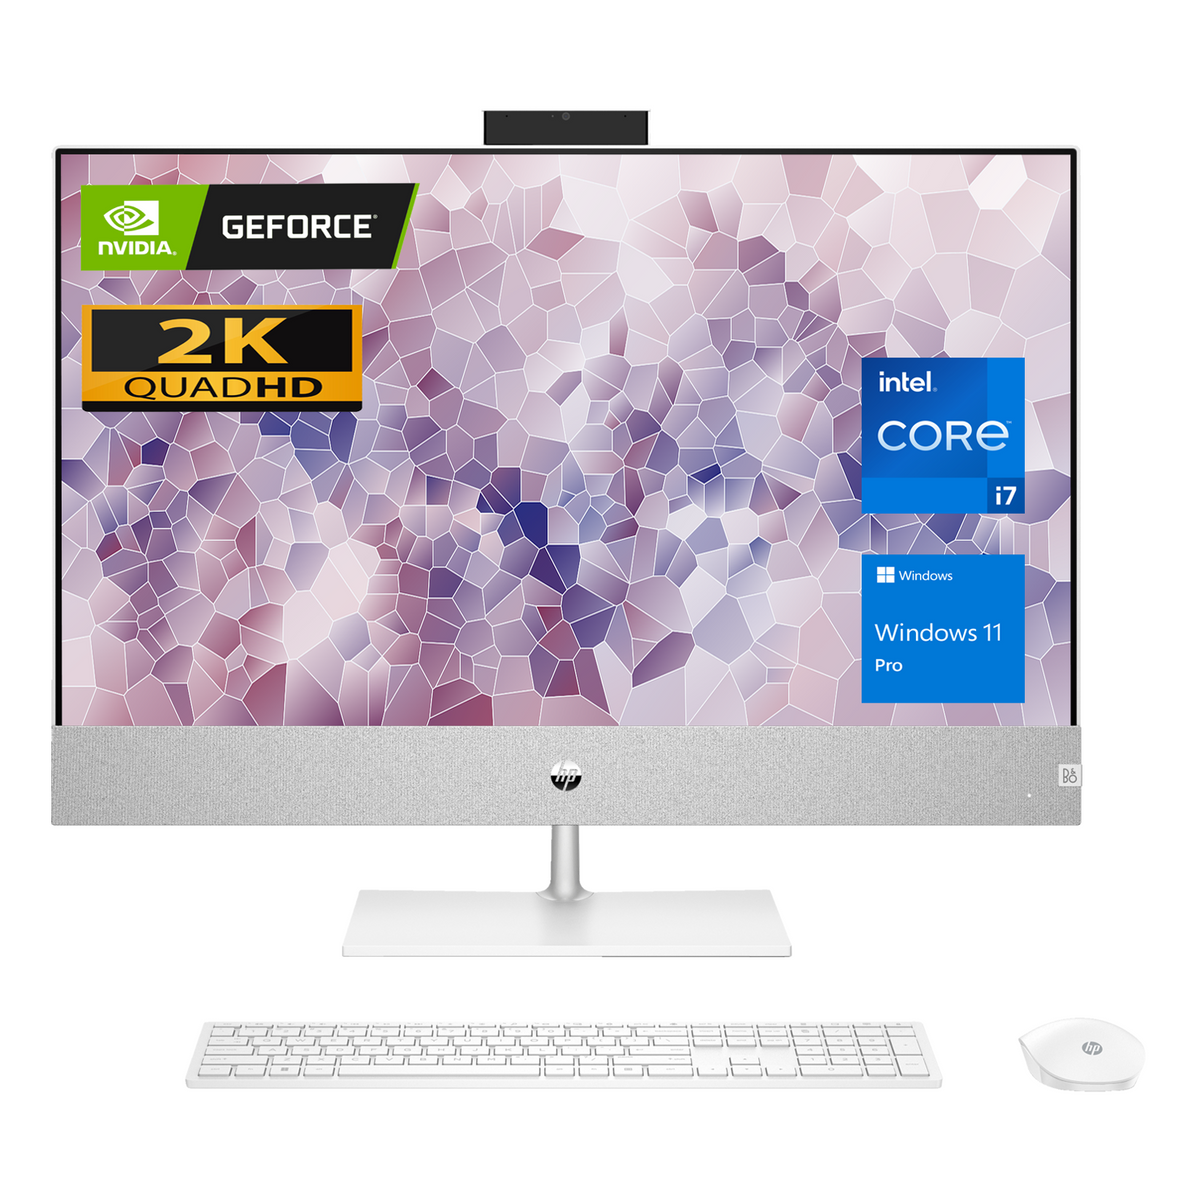 HP Pavilion Daily All-in-One, 27" QHD 2560*1440 Non-touch 60Hz, Intel Core i7-13700T, NVIDIA GeForce RTX 3050, 8GB DDR4 SODIMM, 1TB PCIe M.2 SSD, Wi-Fi 6, Non-backlit Keyboard, Windows 11 Home, White